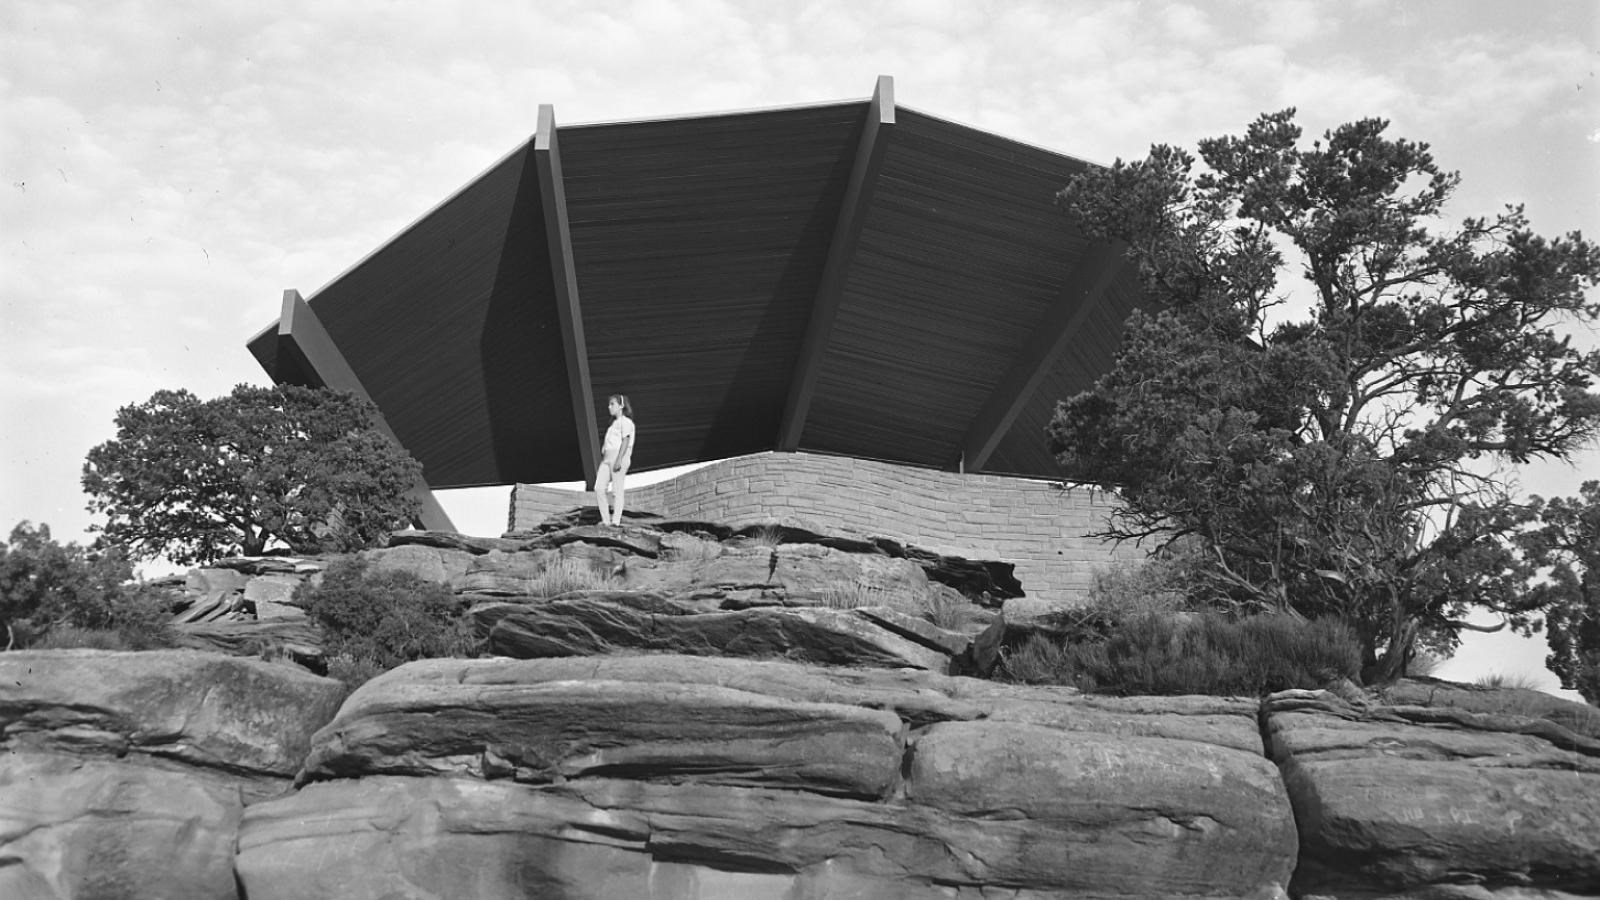 Sandstone brick shelter with cantilevered wooden roof fanning out above it.